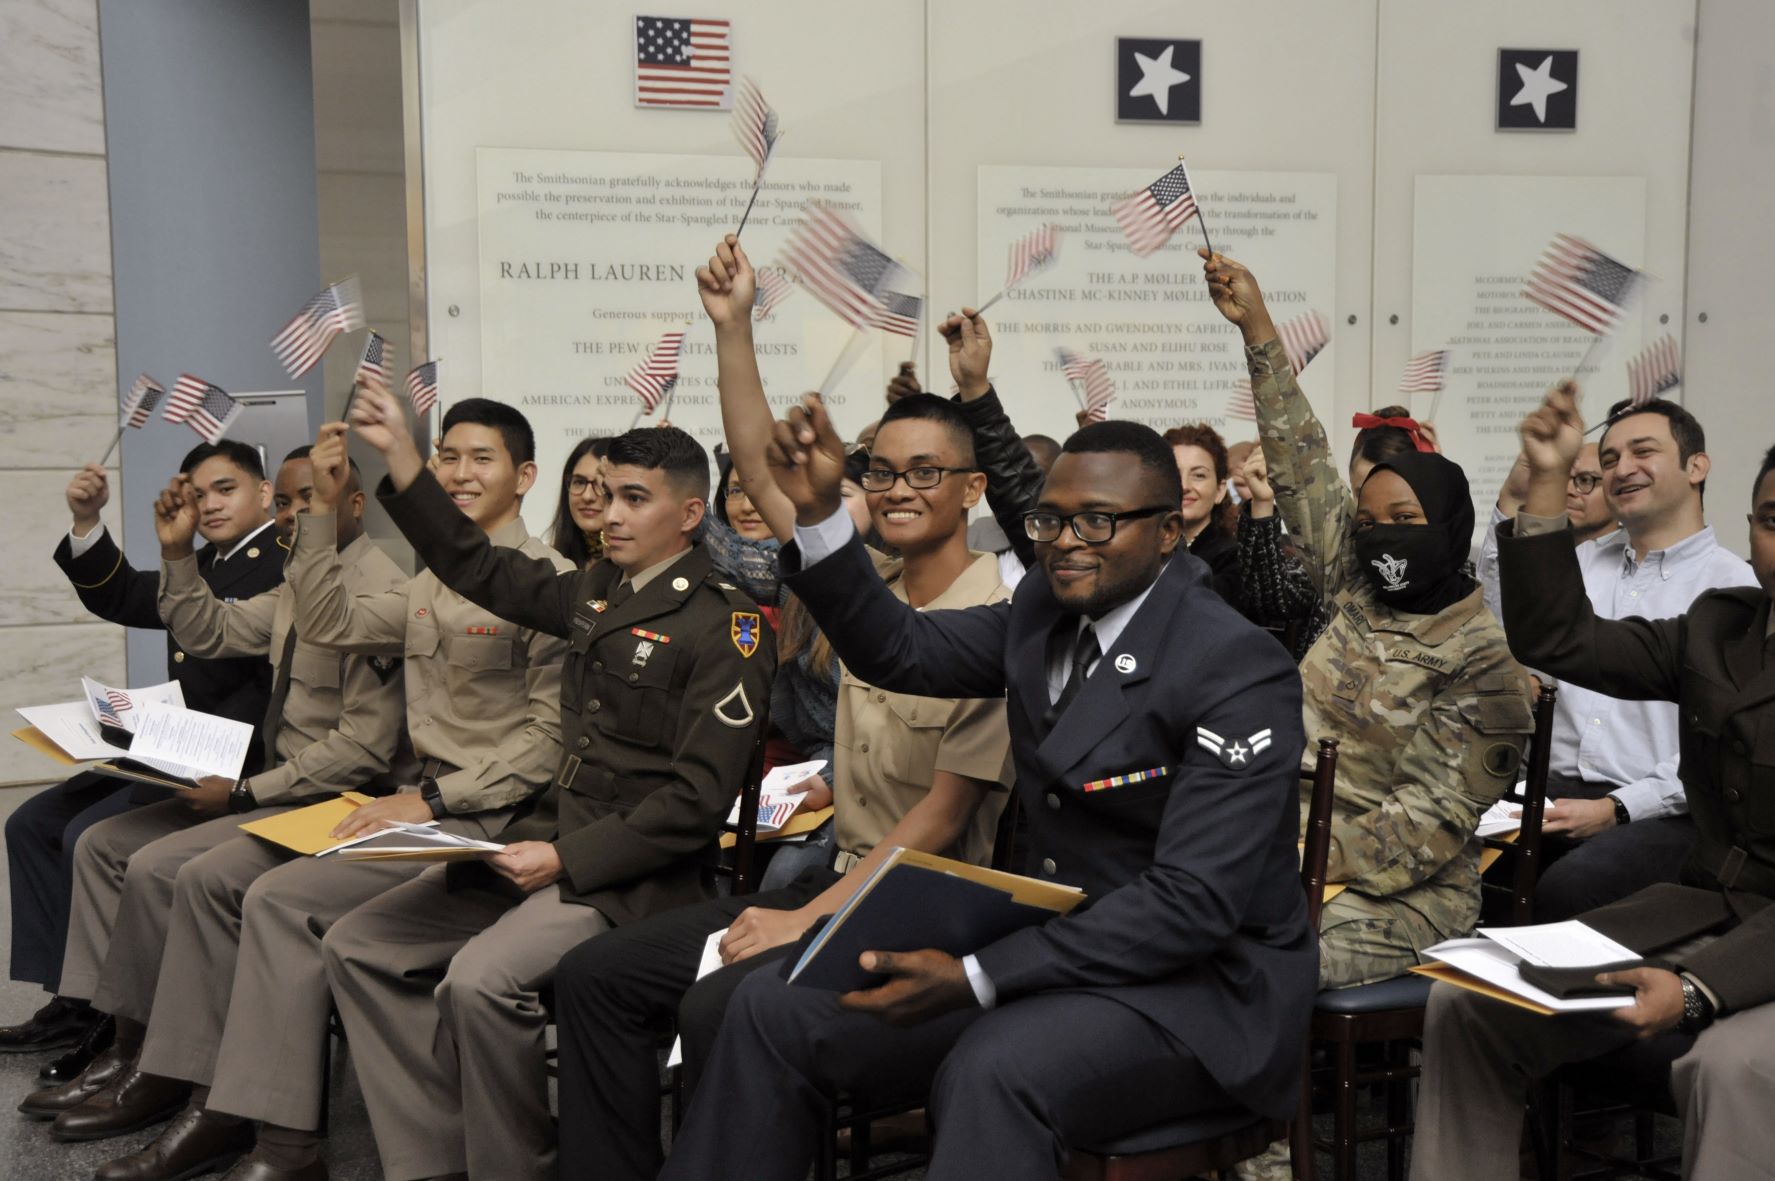 Group of people sitting in chairs while waving mini American flags